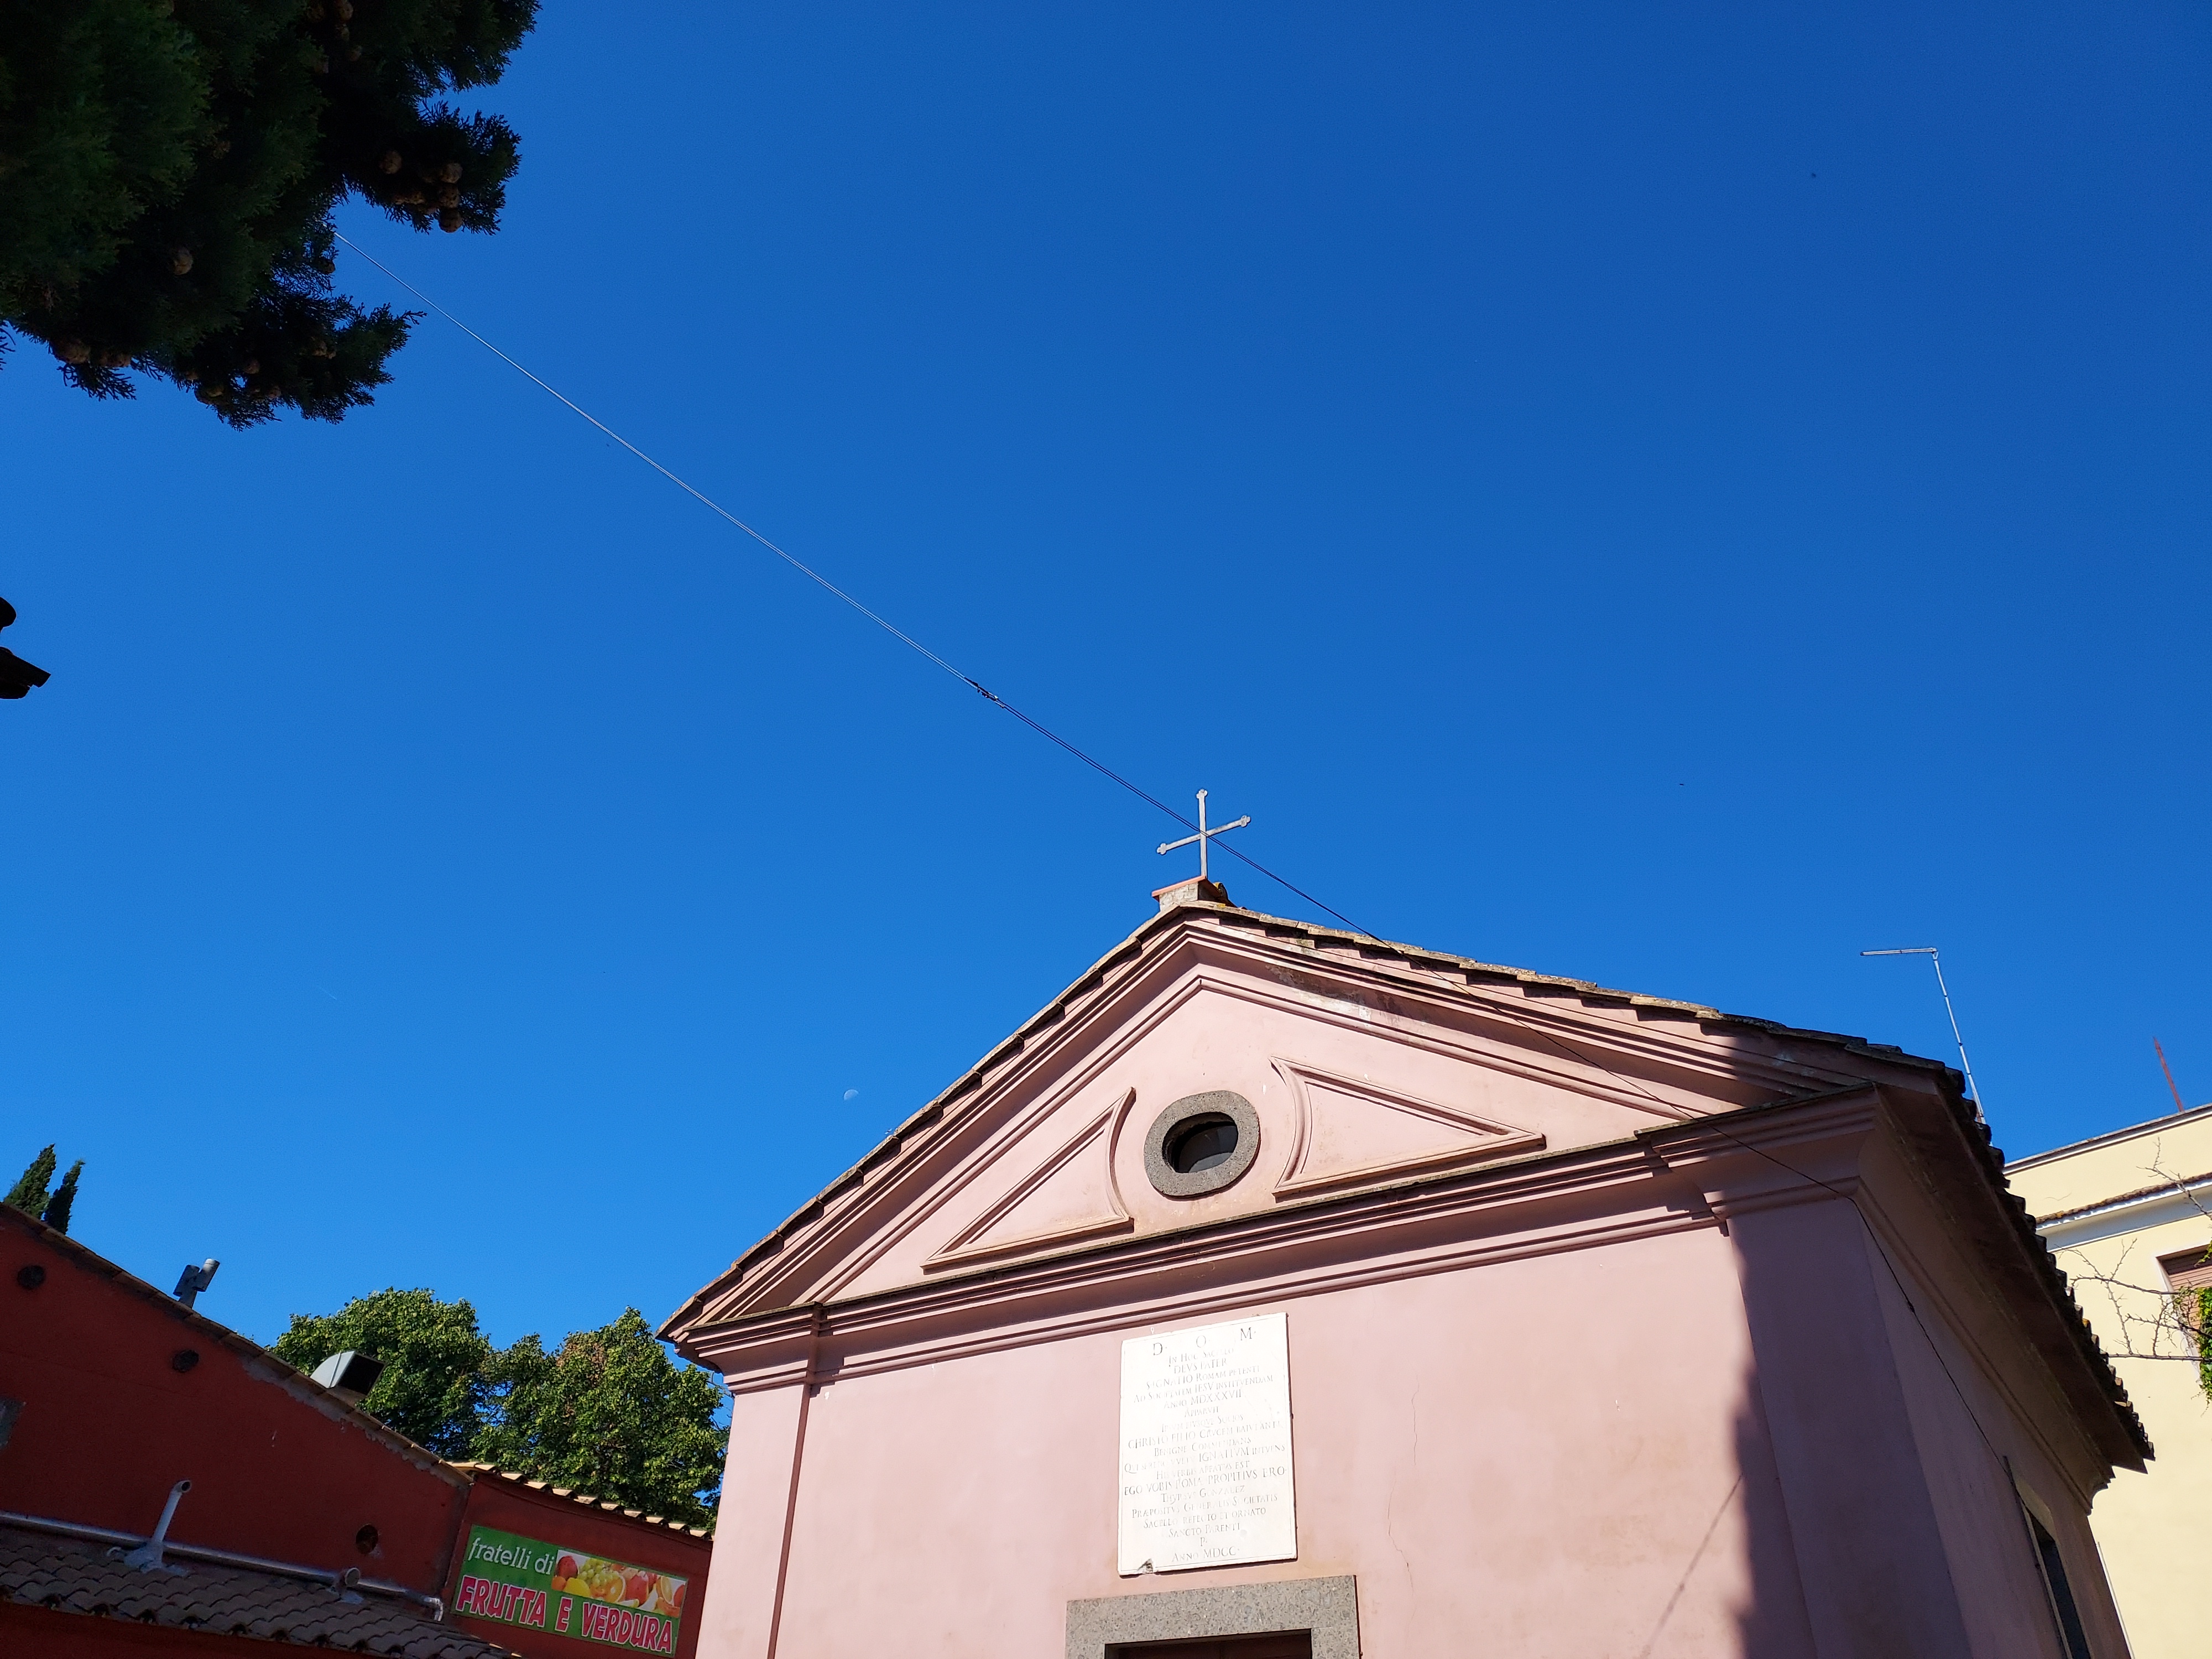 La Storta Chapel in Rome (photo taken by the author on June 20, 2022). Here St. Ignatius is believed to have had a vision of God the Father and Christ, who said to Ignatius, "I will be favorable to you in Rome" during the early days of his order's (The Society Of Jesus's) activity.